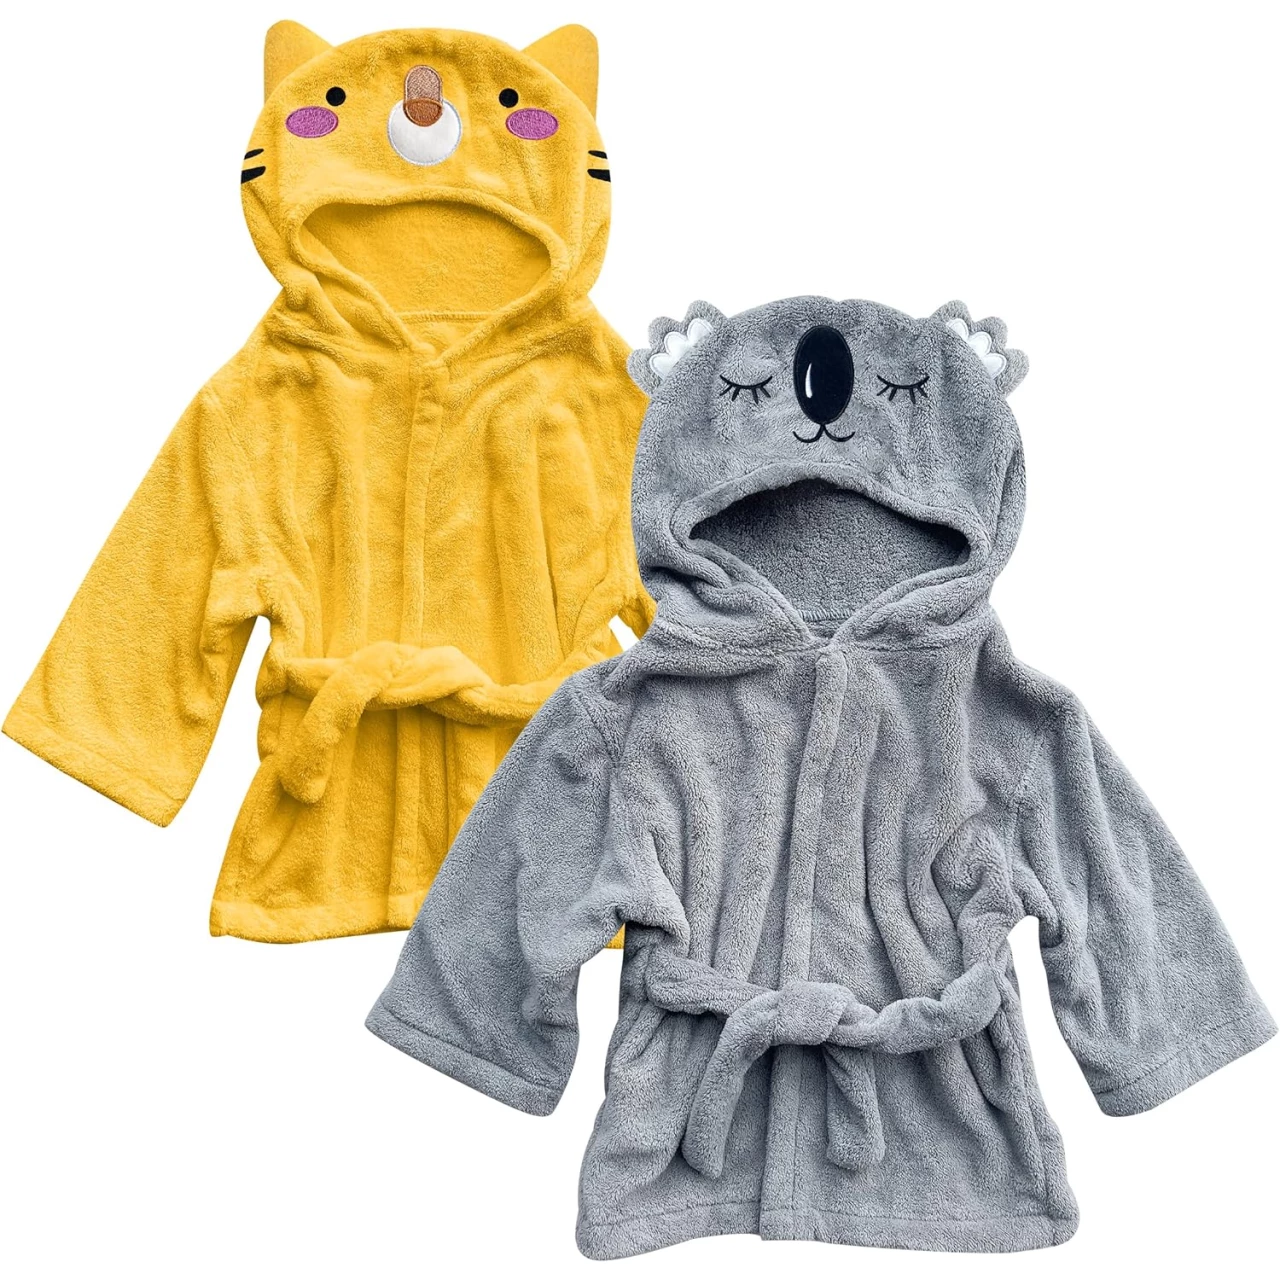 Sunny zzzZZ 2 Pack Unisex Baby Plush Animal Face Robe for 0-9 Months - Neutral Design Softest Newborn Clothes for Boys and Girls - Baby Essentials Registry Search Gifts - Cat and Koala